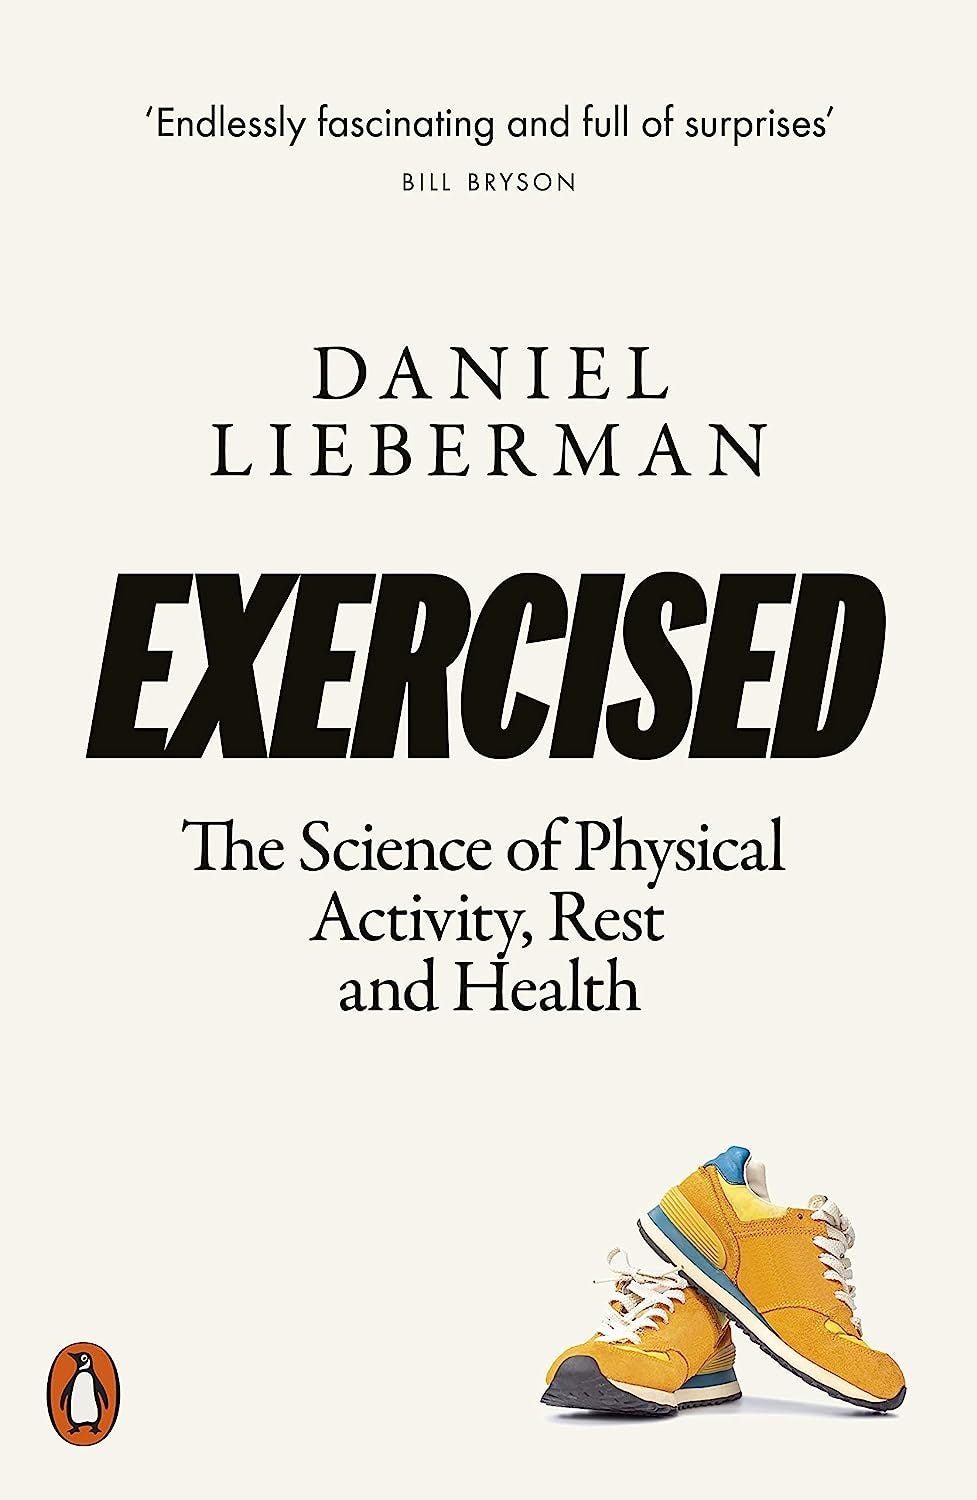 Cover for the book, “Exercised: The Science of Physical Activity, Rest, and Health,” but Daniel Lieberman.